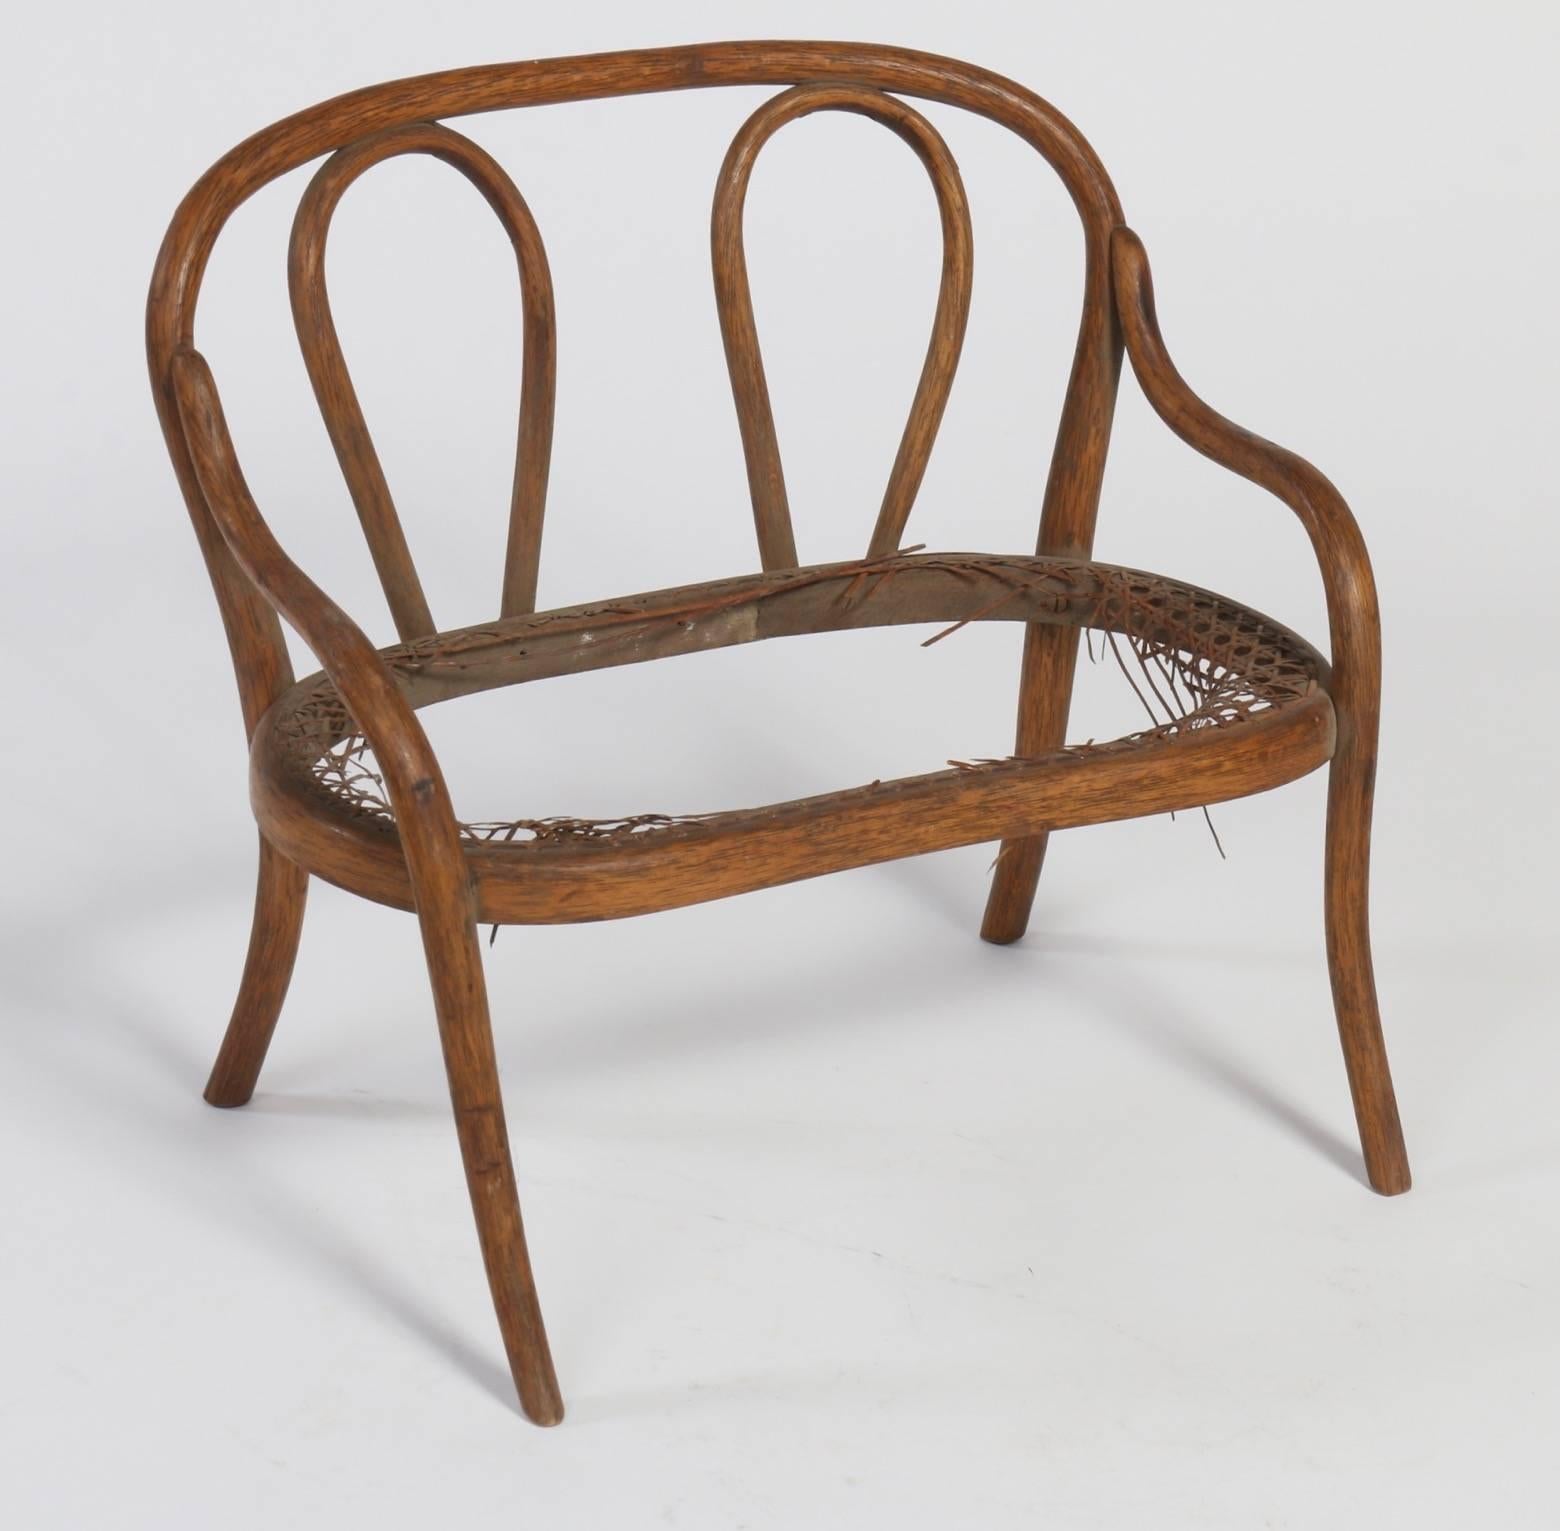 Austrian Thonet Bent Beechwood Doll Furniture, circa 1875, Rare and Important For Sale